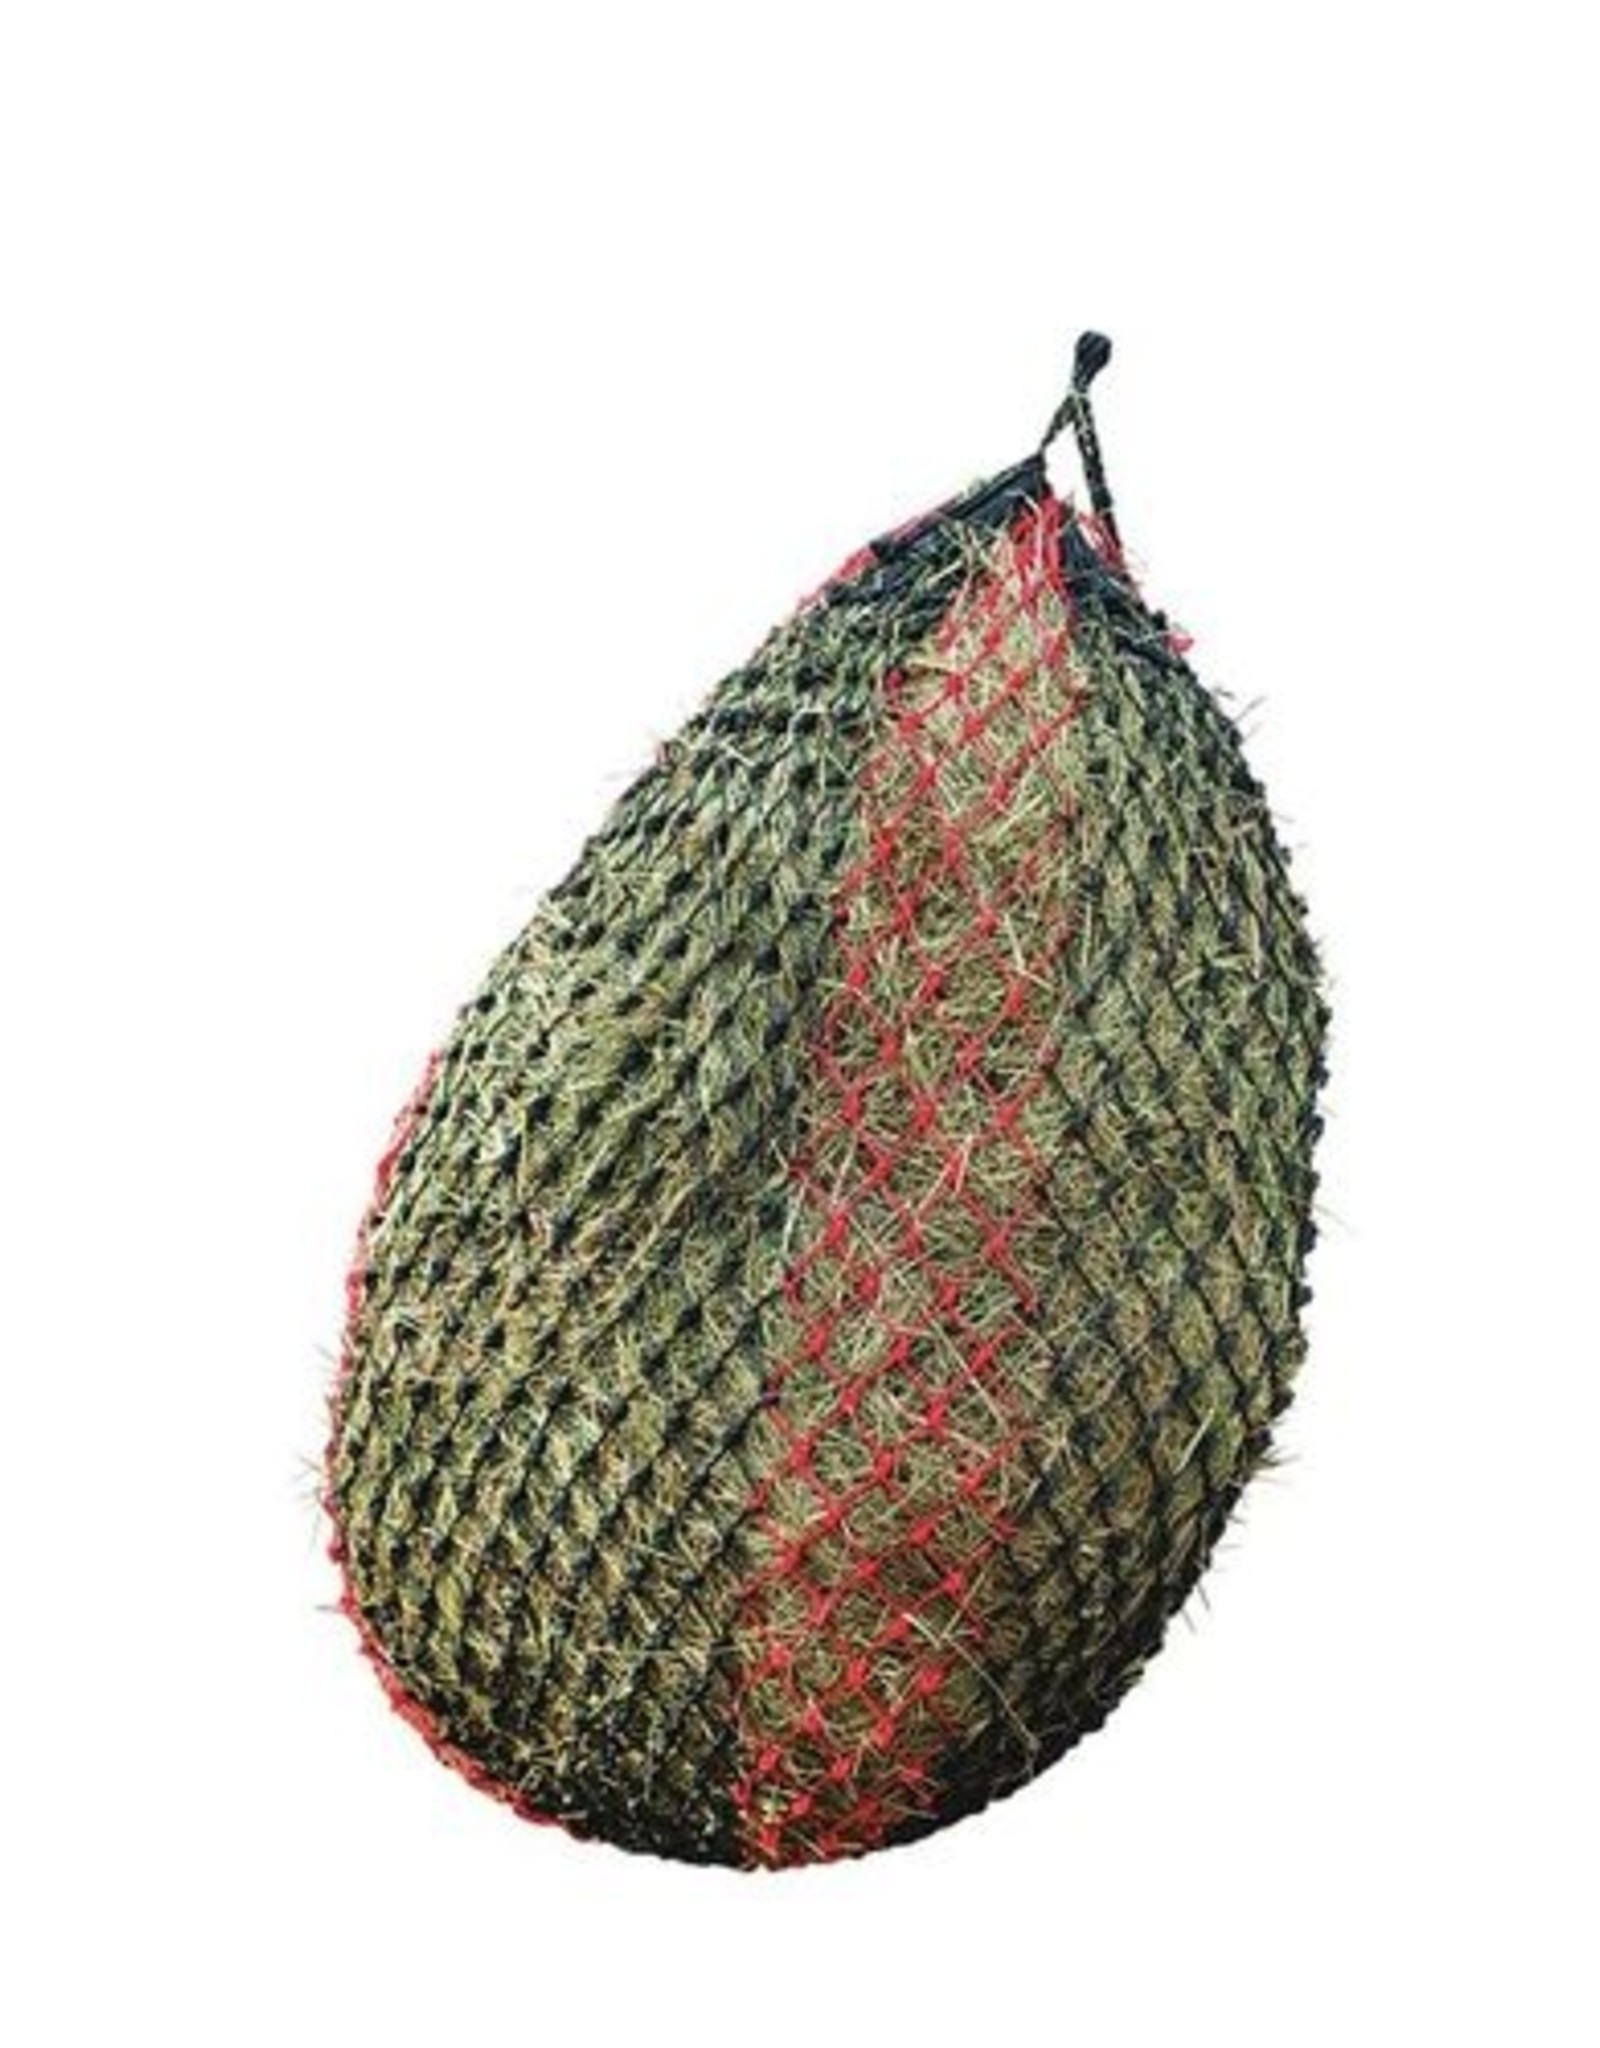 Shire's Equestrian Shires Deluxe Haylage Net